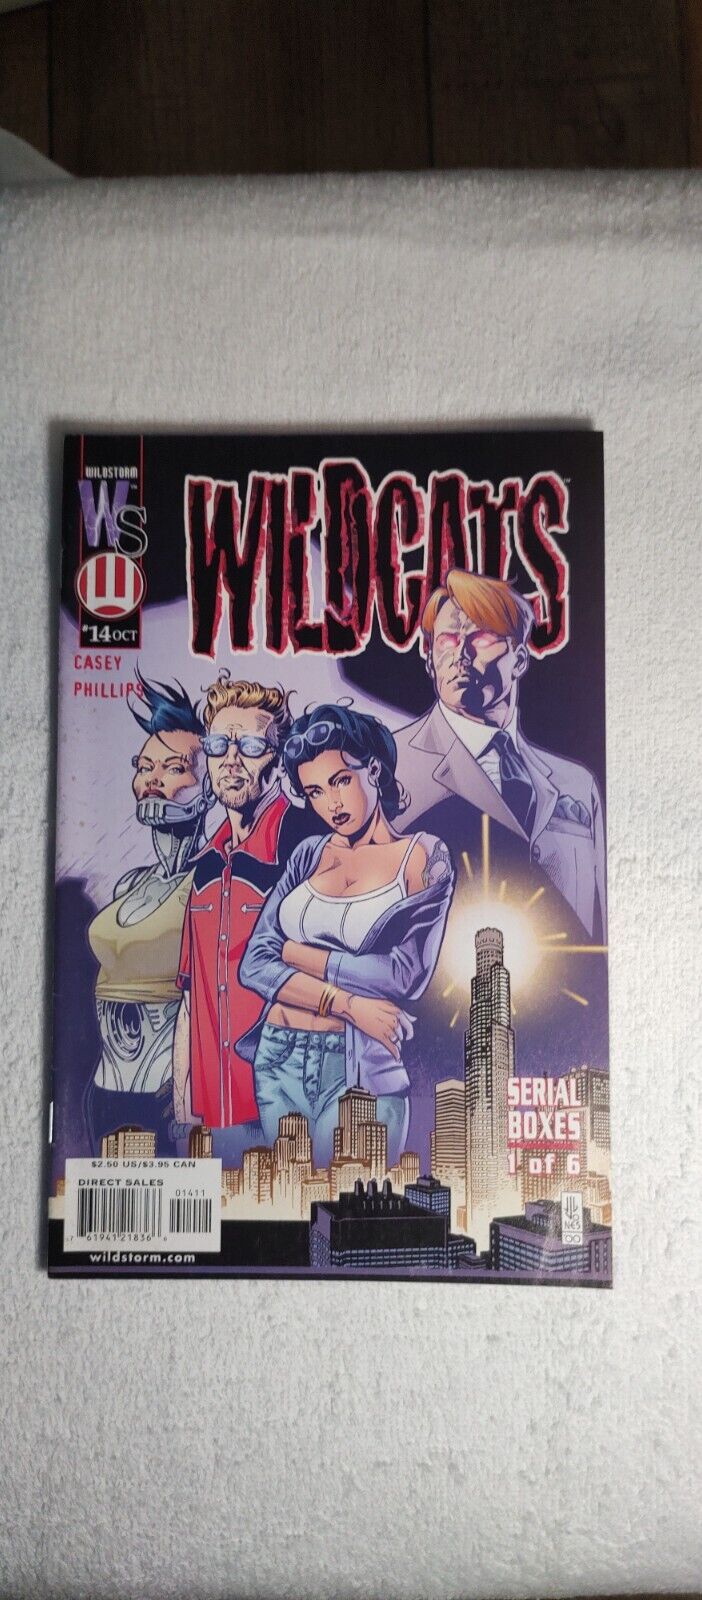 Cb18~comic book~rare wildcats serial boxes 1 of 6 issue #14 Oct